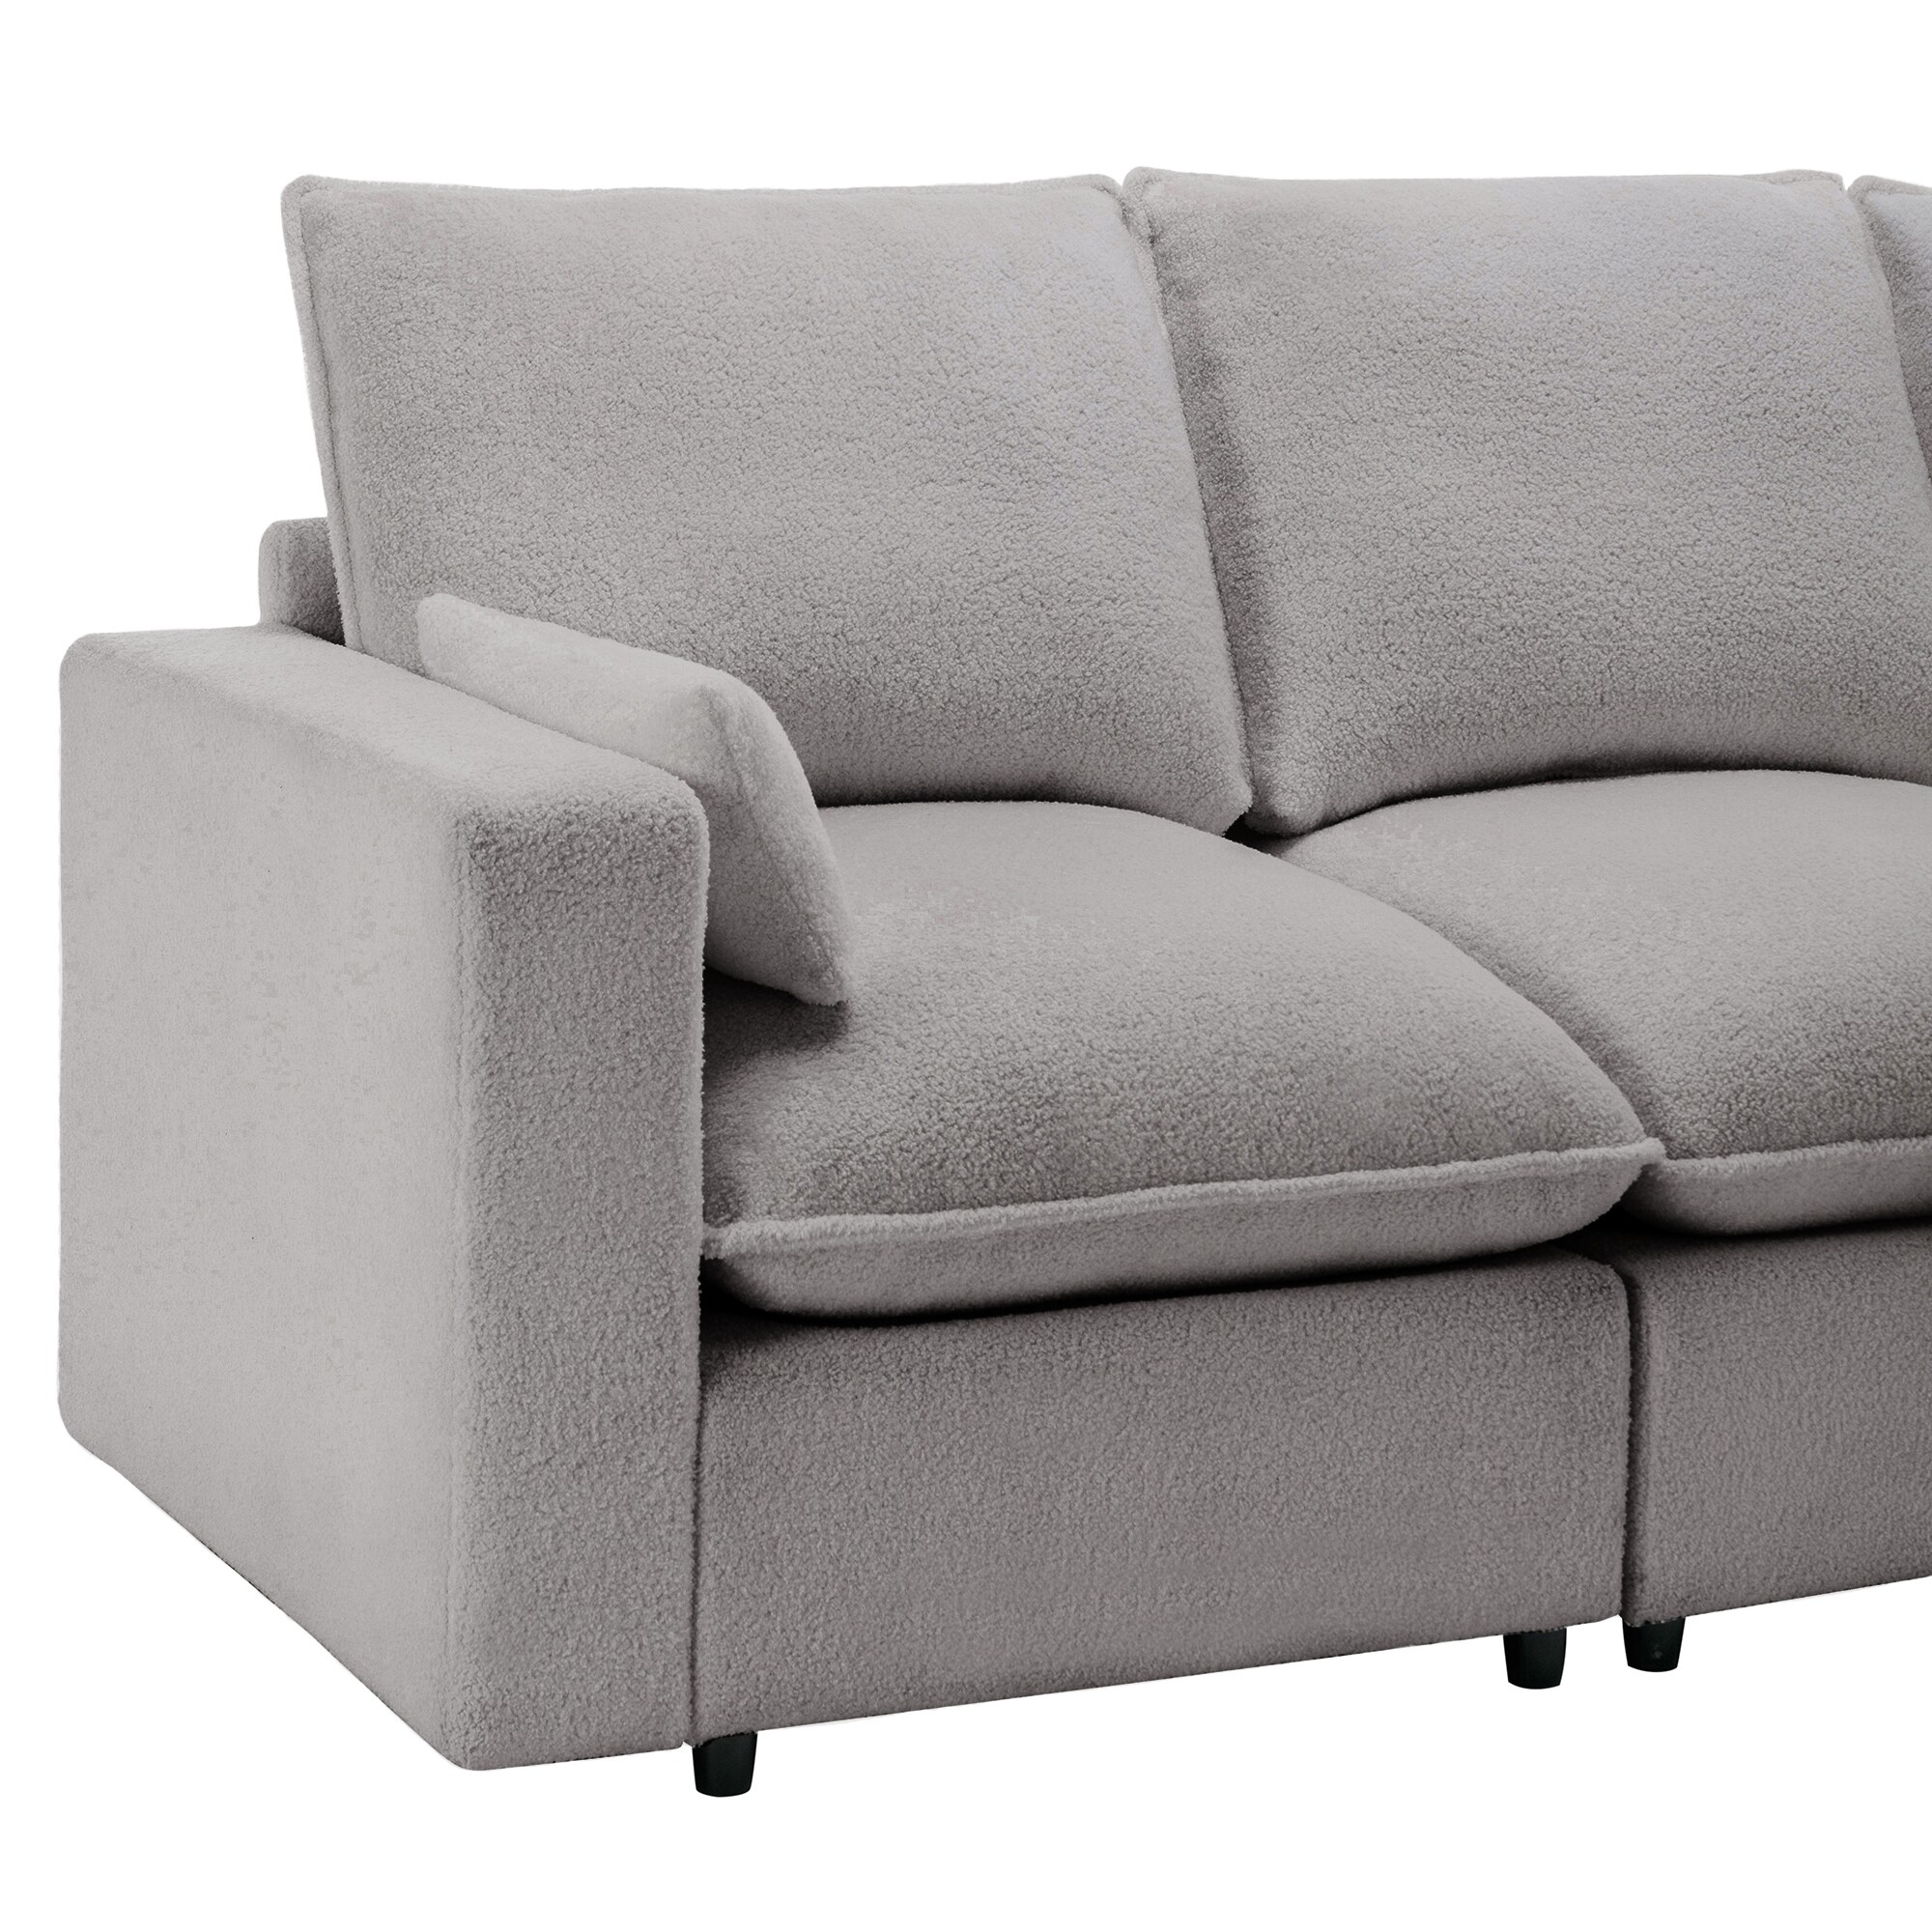 https://ak1.ostkcdn.com/images/products/is/images/direct/8f591d650e524f5f8977c579de3c81dc12955154/3-Seat-Sofa-with-Removable-Back-and-Seat-Cushions-and-2-pillows.jpg